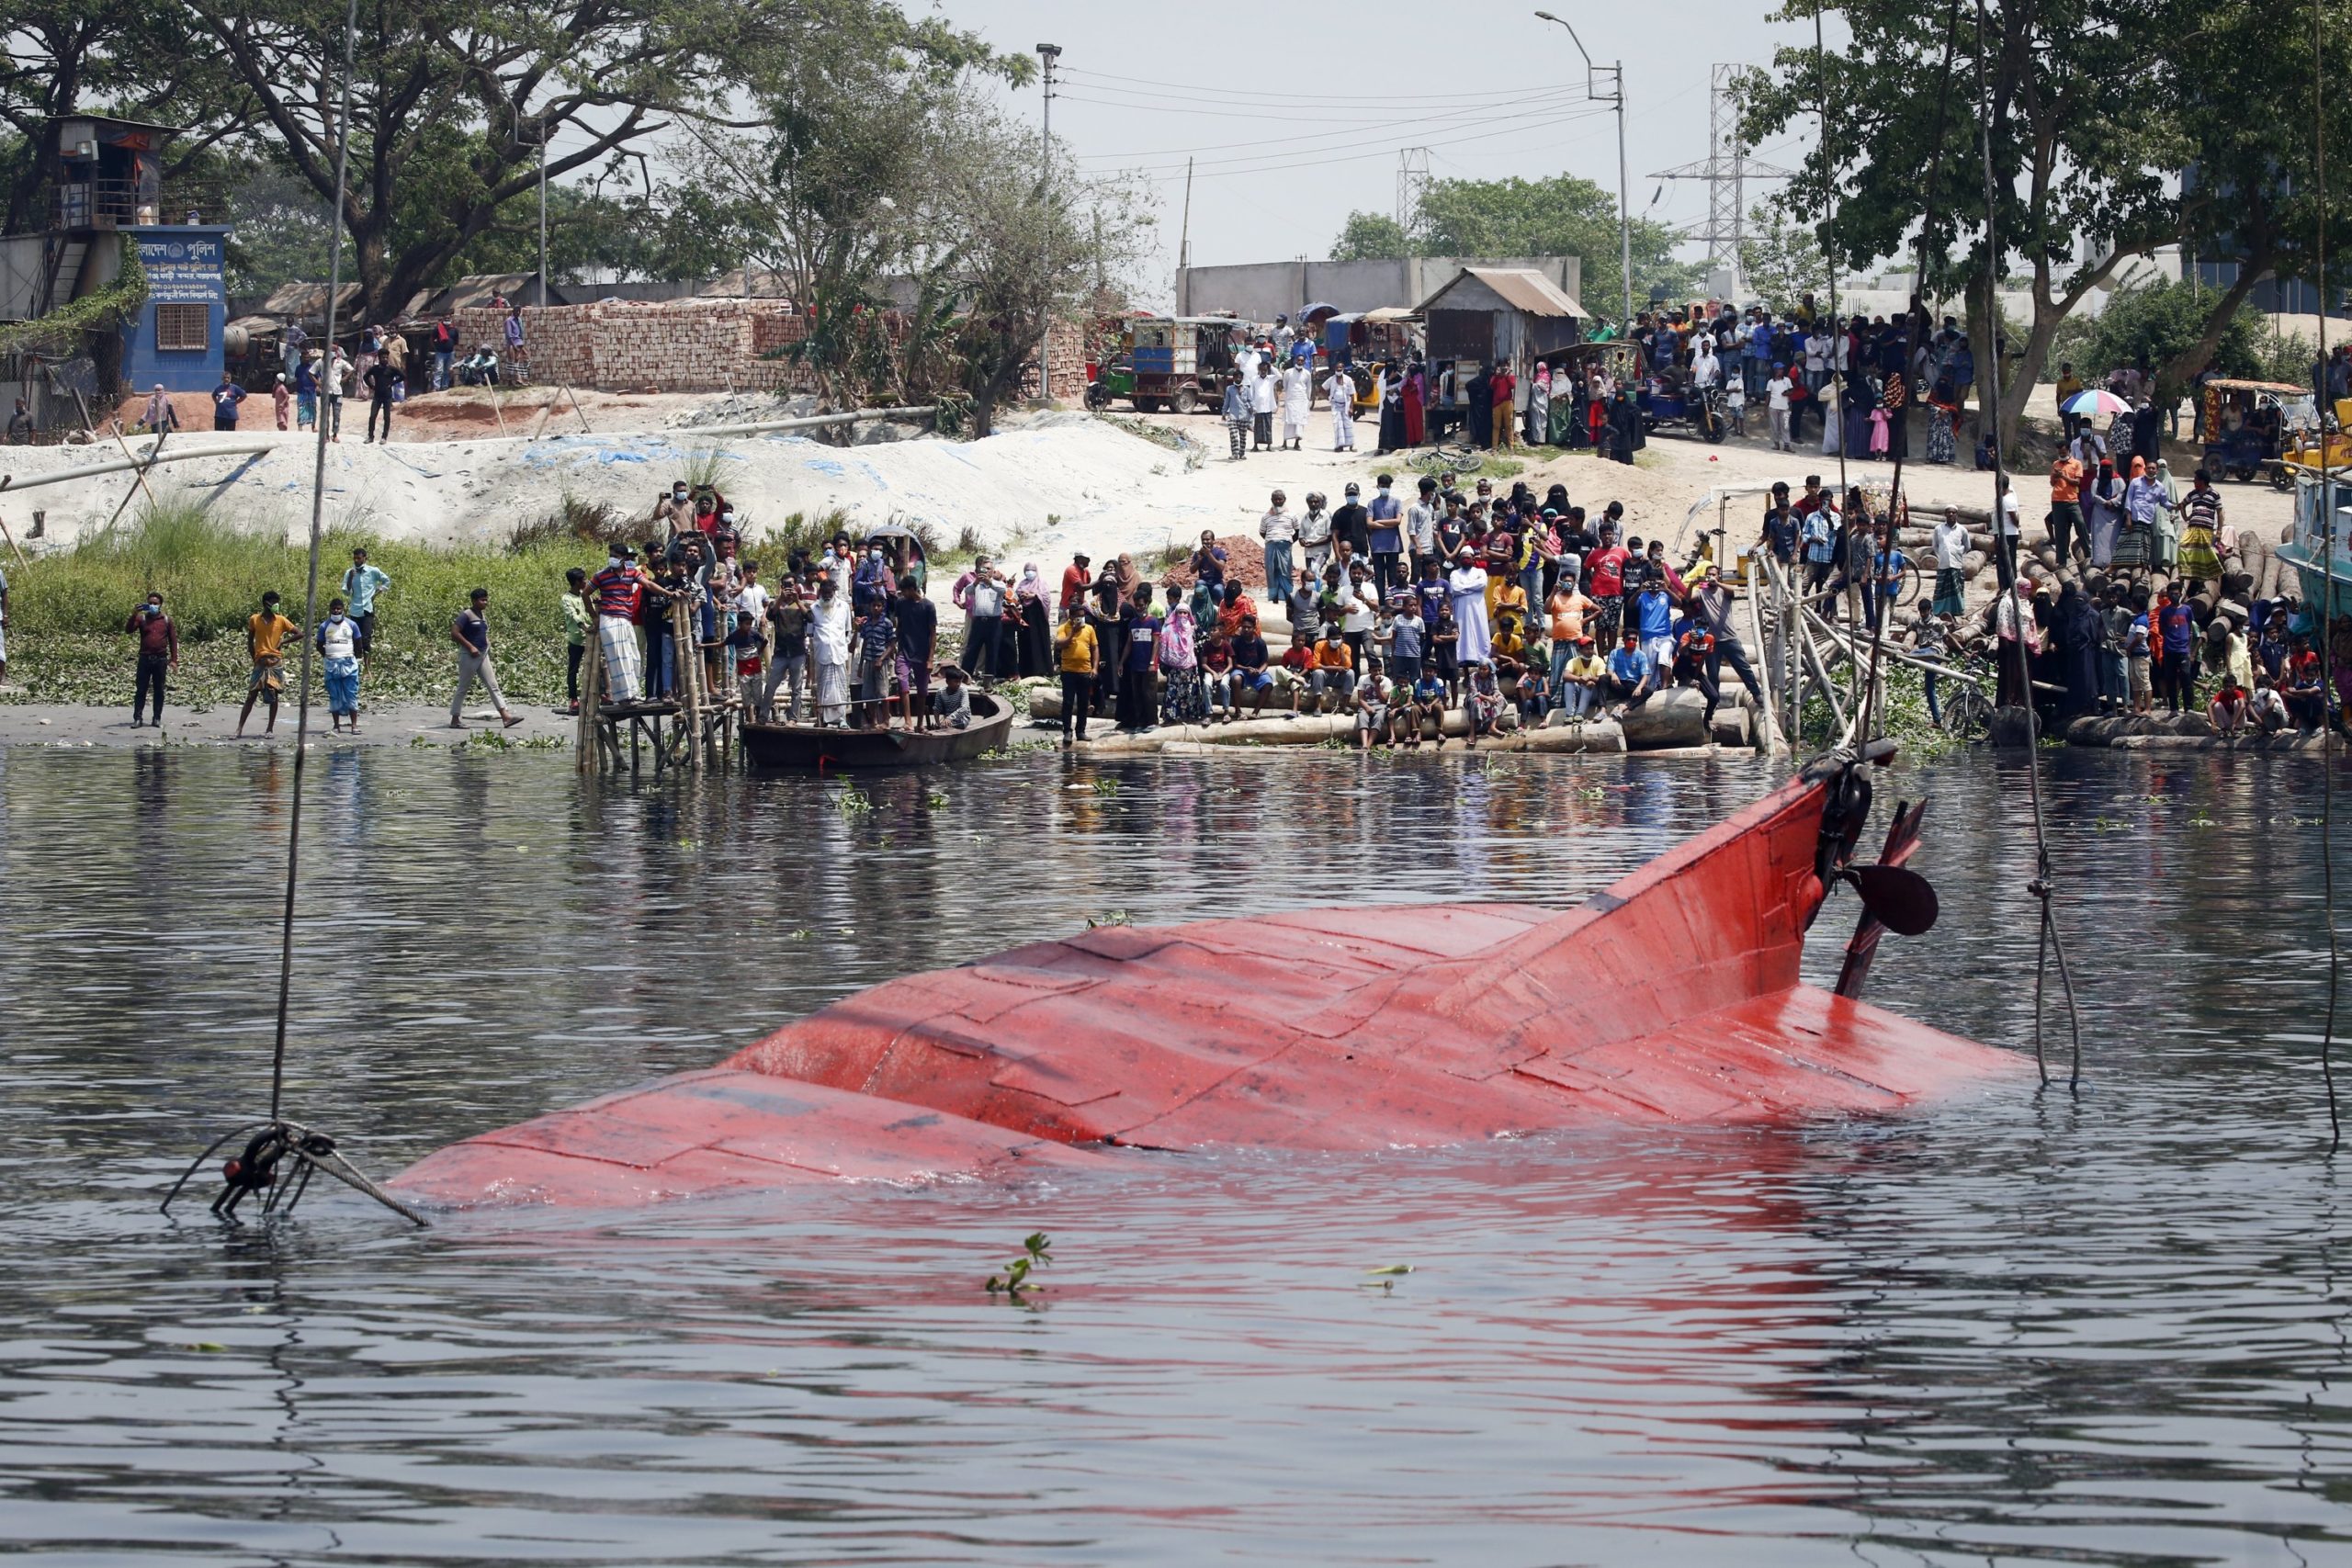 26 Killed In Bangladesh Boat Accident